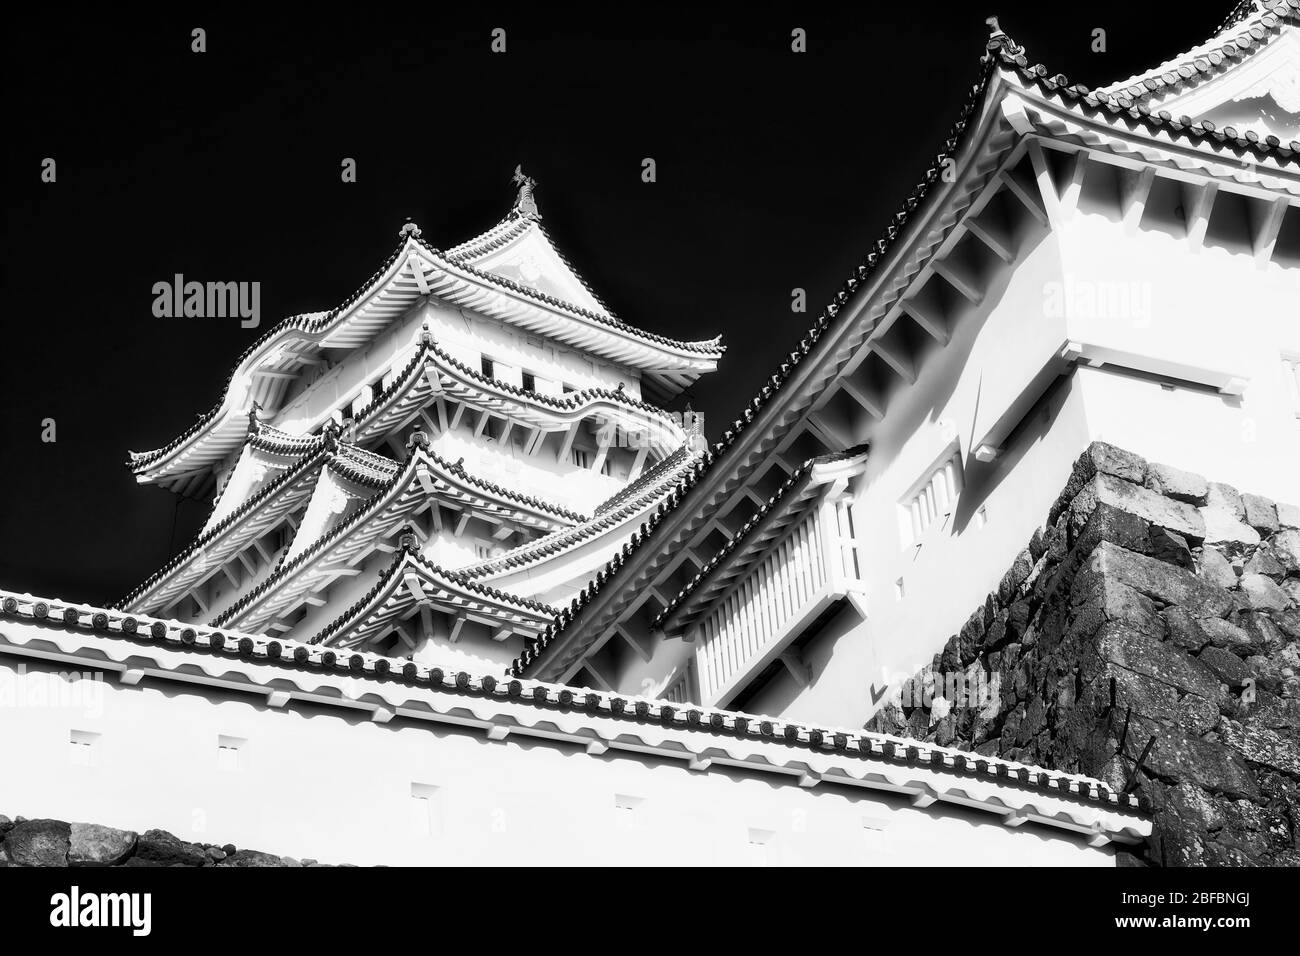 Black-white shapes of tall white towers and traditional japanese roofs with beams - historic Himeji castle. Stock Photo